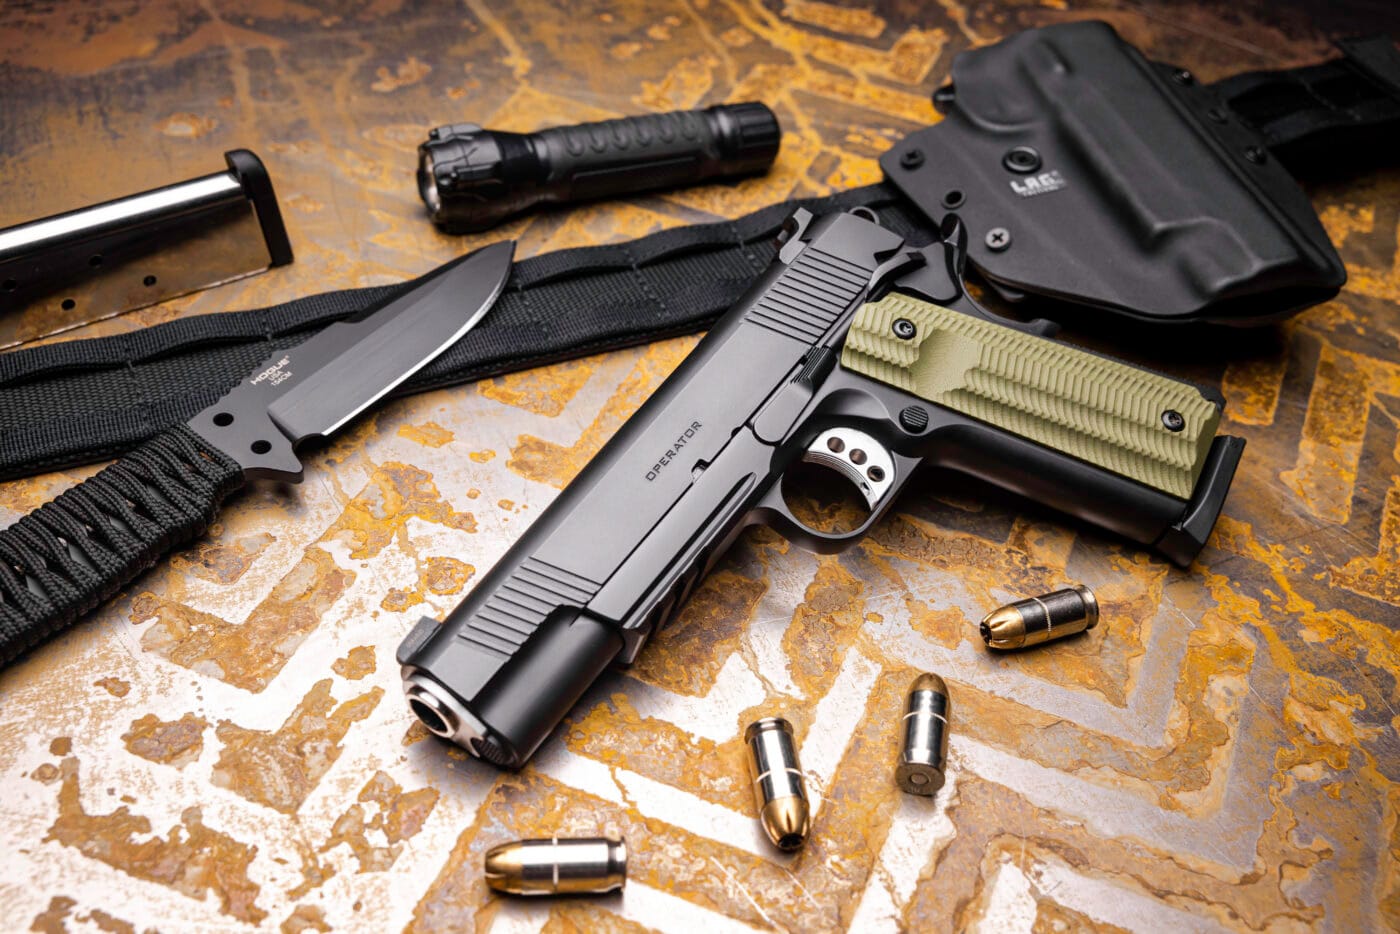 Defensive gear including 1911 pistol by Springfield Armory